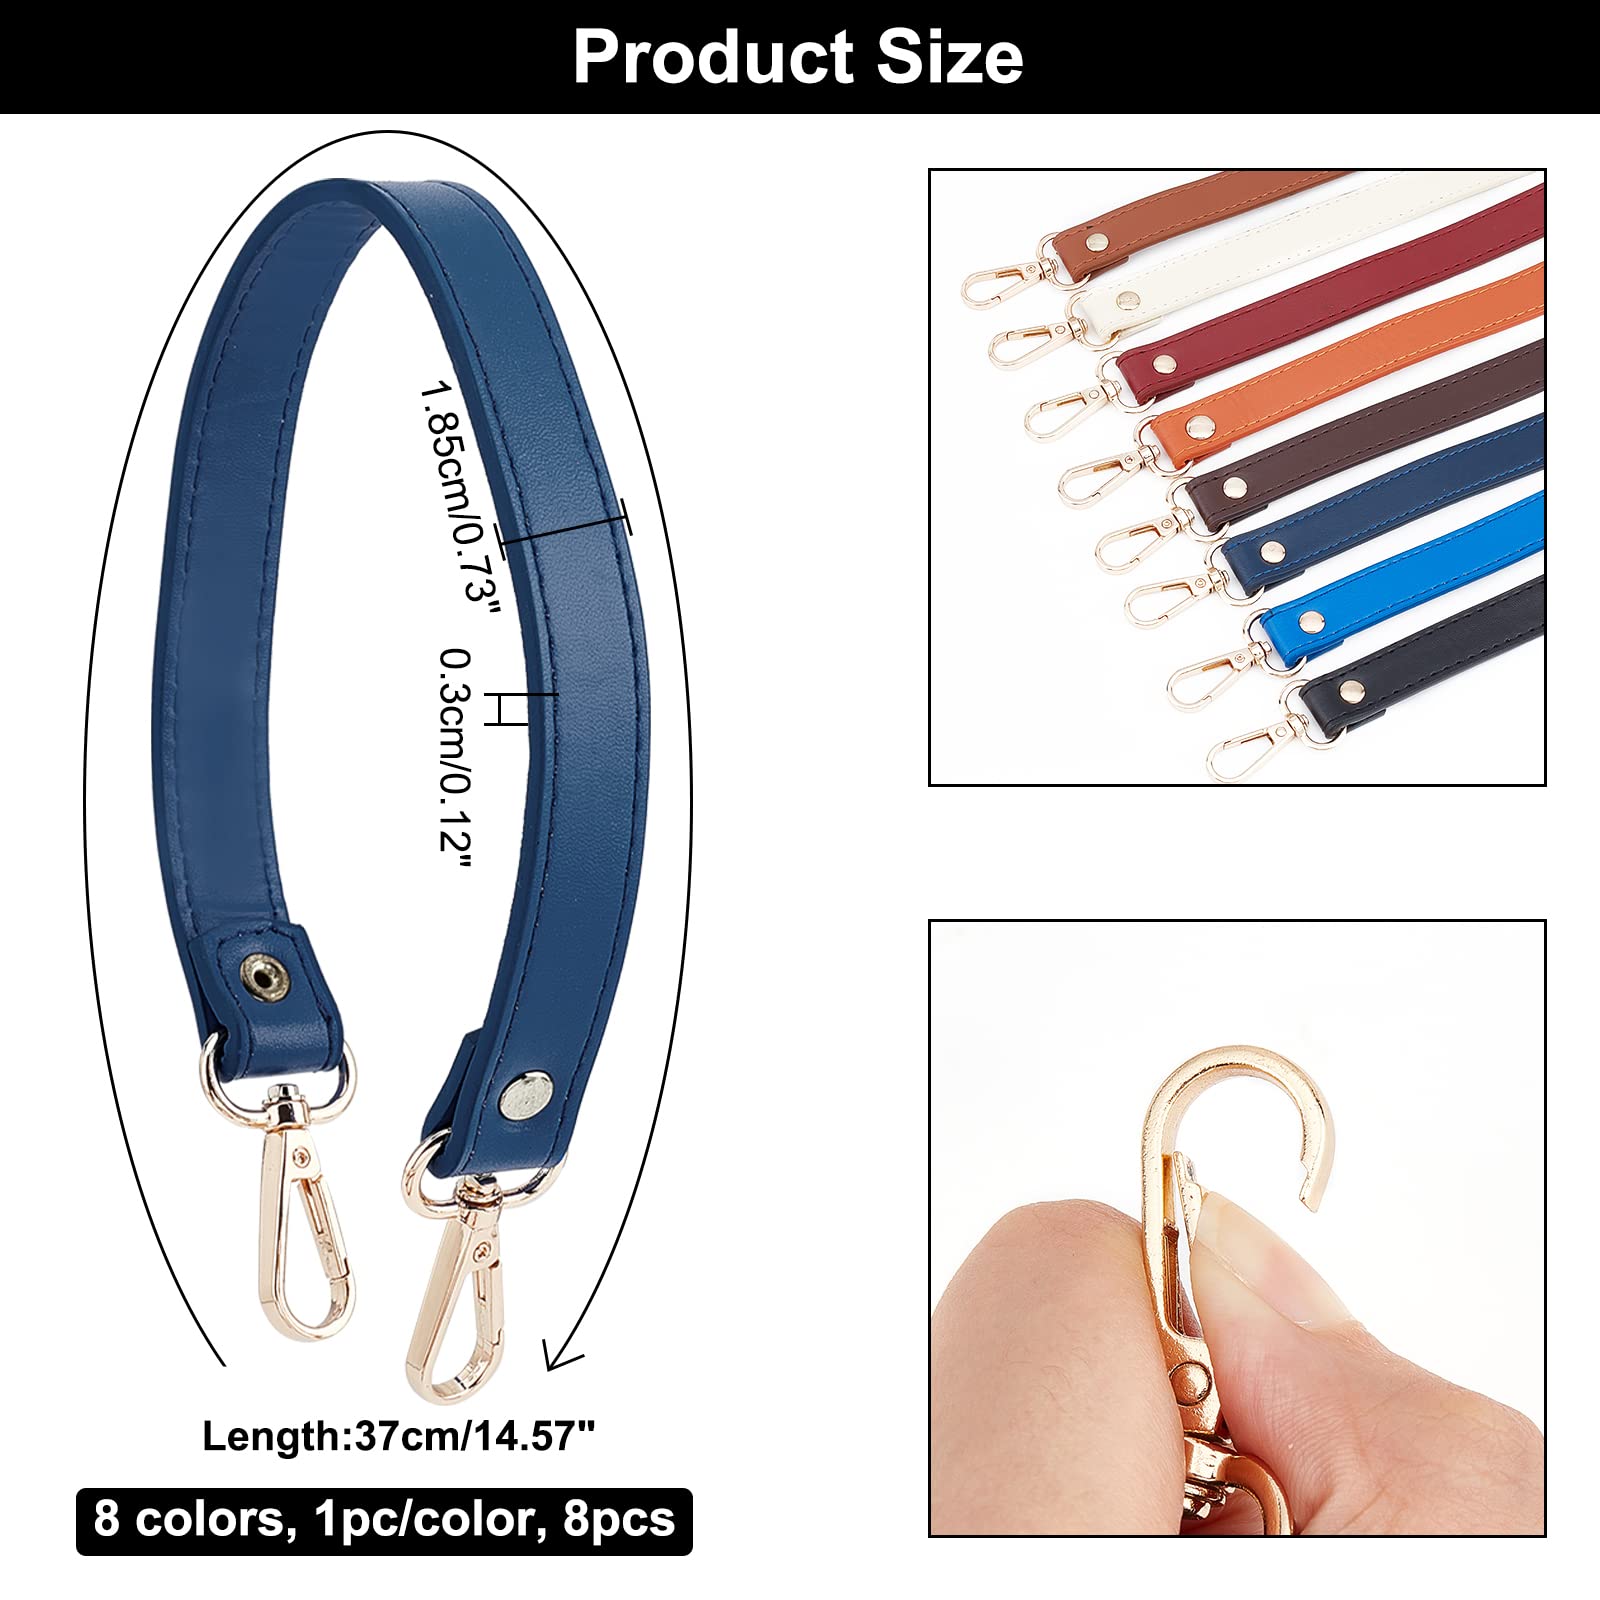 SUPERFINDINGS 8 Colors Short Leather Purse Handle Short Clutch Bag Handles Leather Replacement Strap 1.22inch/37cm Full Grain Leather Purse Handle Strap with Golden Alloy Swivel Clasps for Handbags